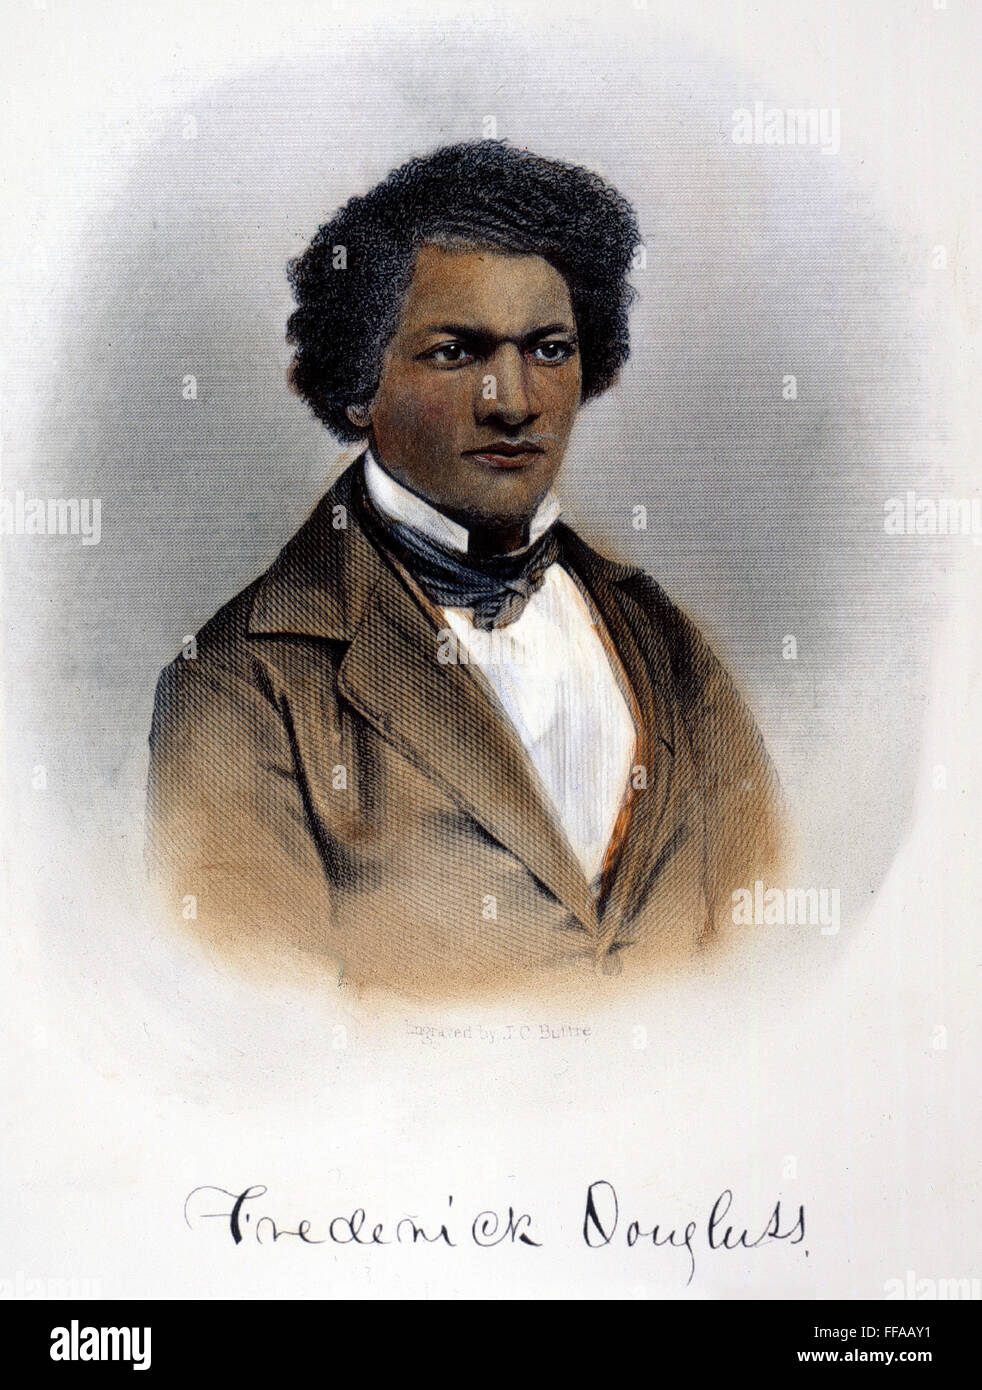 FREDERICK DOUGLASS /n(c1817-1895). American abolitionist and writer. Steel engraving, American, 1854. Stock Photo